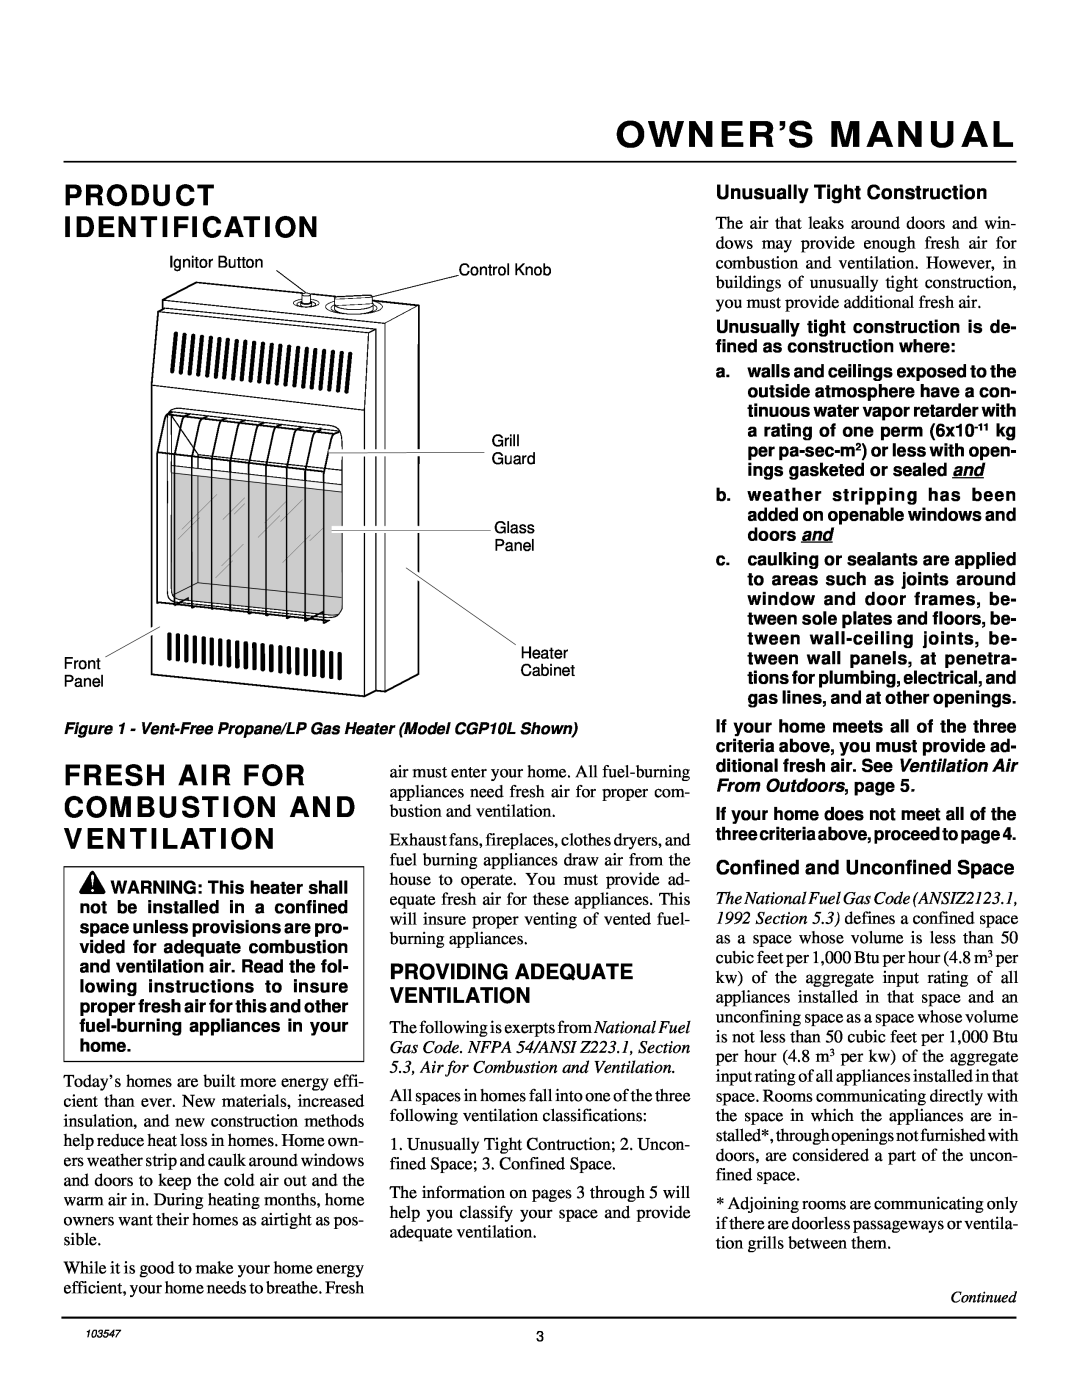 Desa CGP10L, CGP6L installation manual Product Identification, Fresh Air For Combustion And Ventilation 